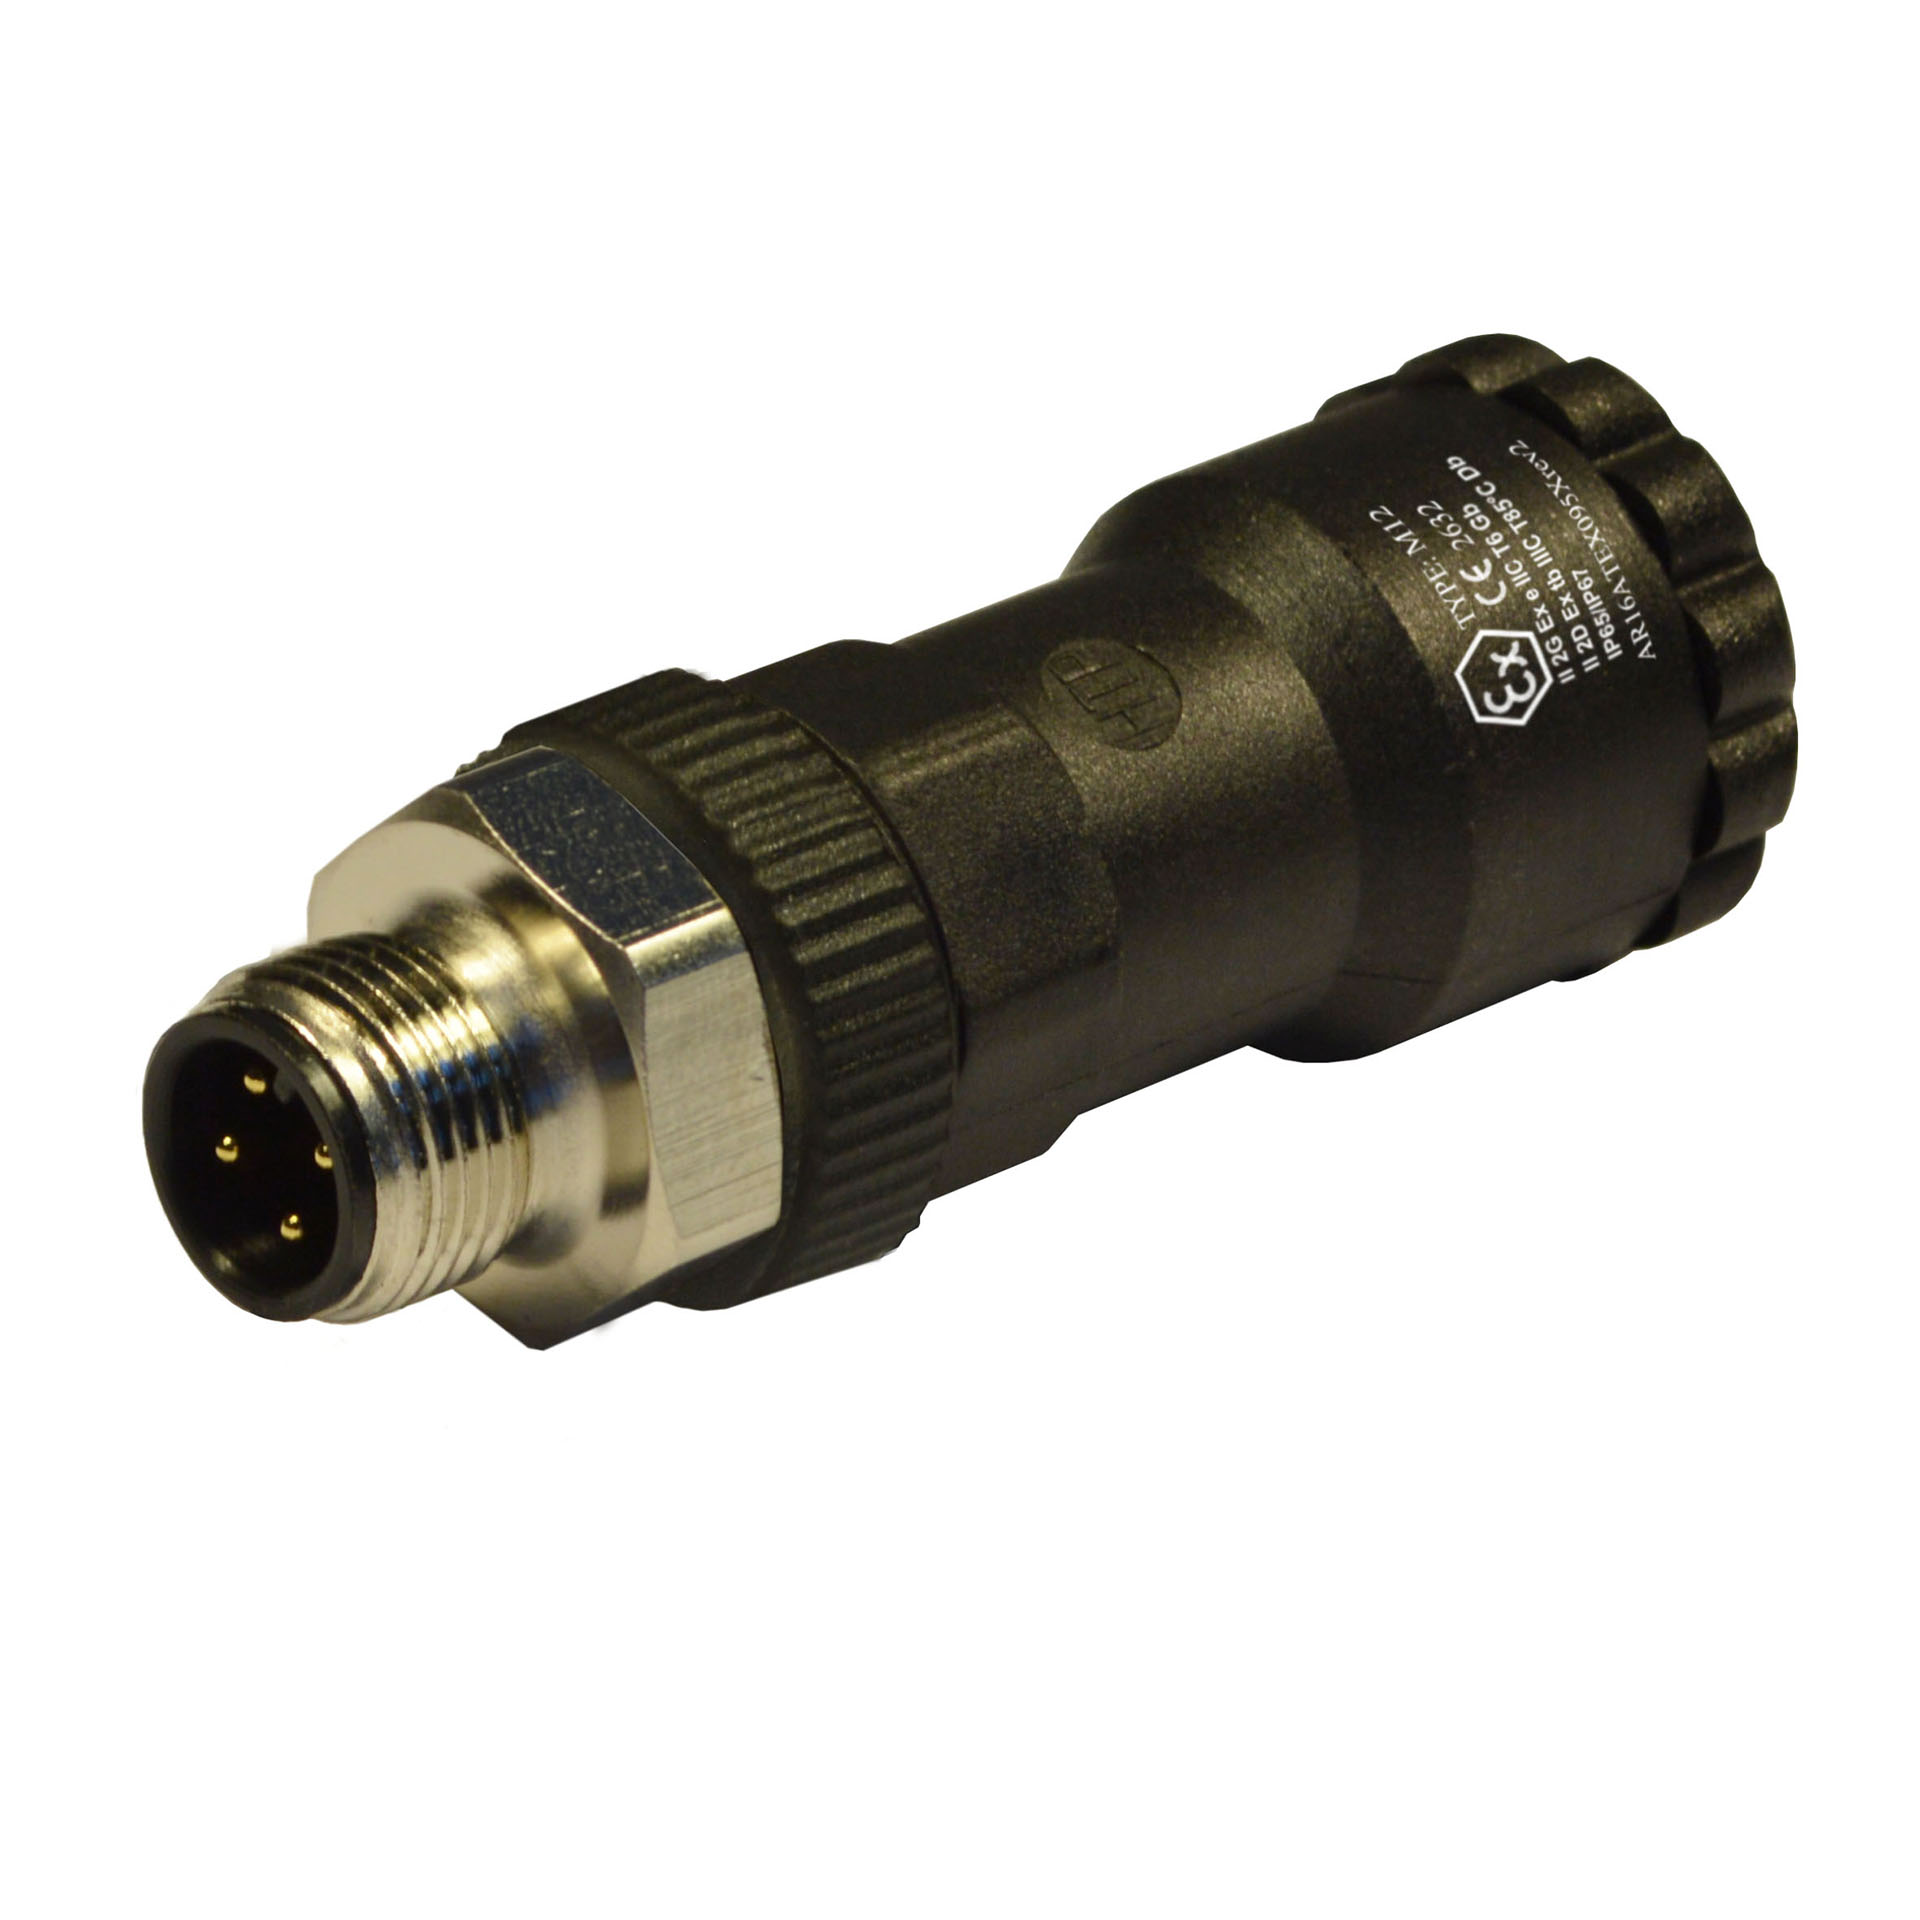 M12 field attachable,male,180°,4p.,PG9/11unif.or double exit cable,ATEX conform